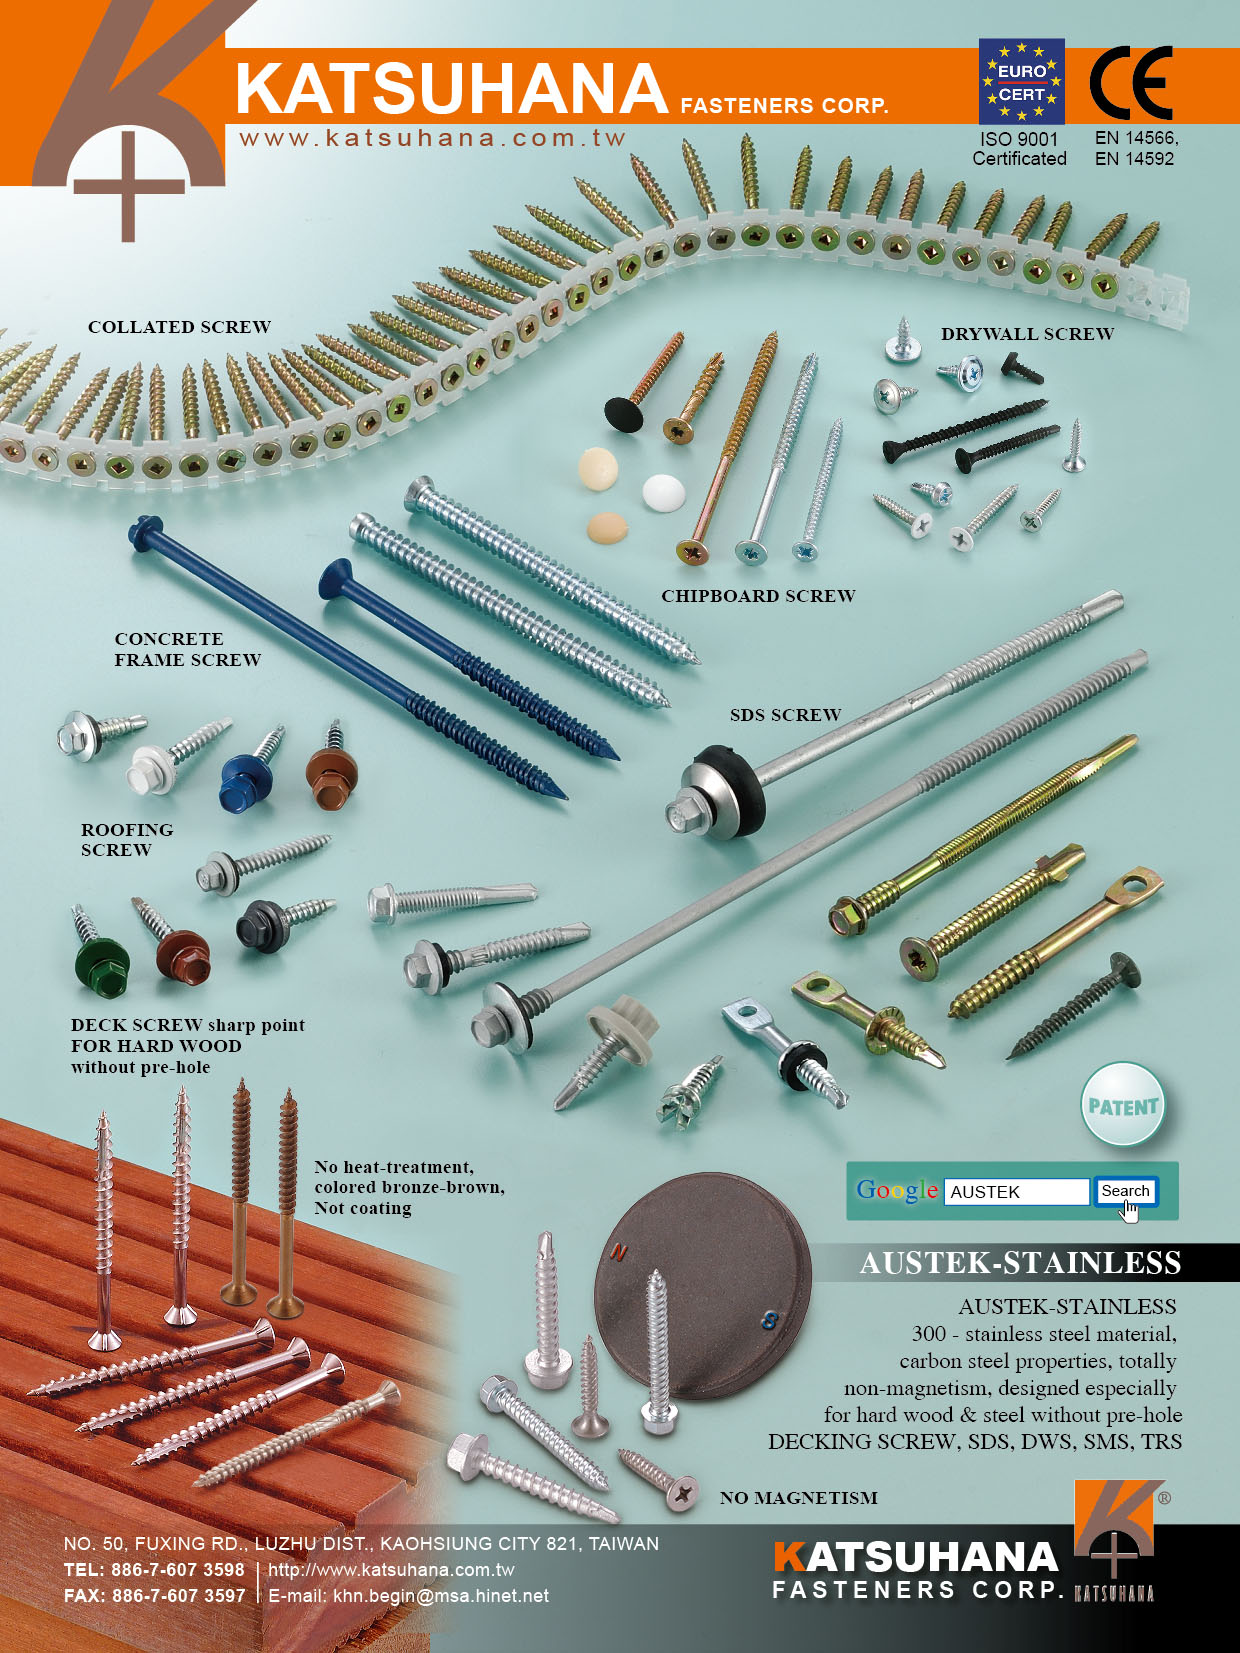 KATSUHANA FASTENERS CORP.  , COLLATED SCREW,CONCRETE SCREW,ROOFING SCREW,DECK SCREW SHARP POINT FOR HARD WOOD WITHOUT PRE-HOLE,DRYWALL SCREW,CHIPBOARD SCREW,SDS SCREW , Chipboard Screws